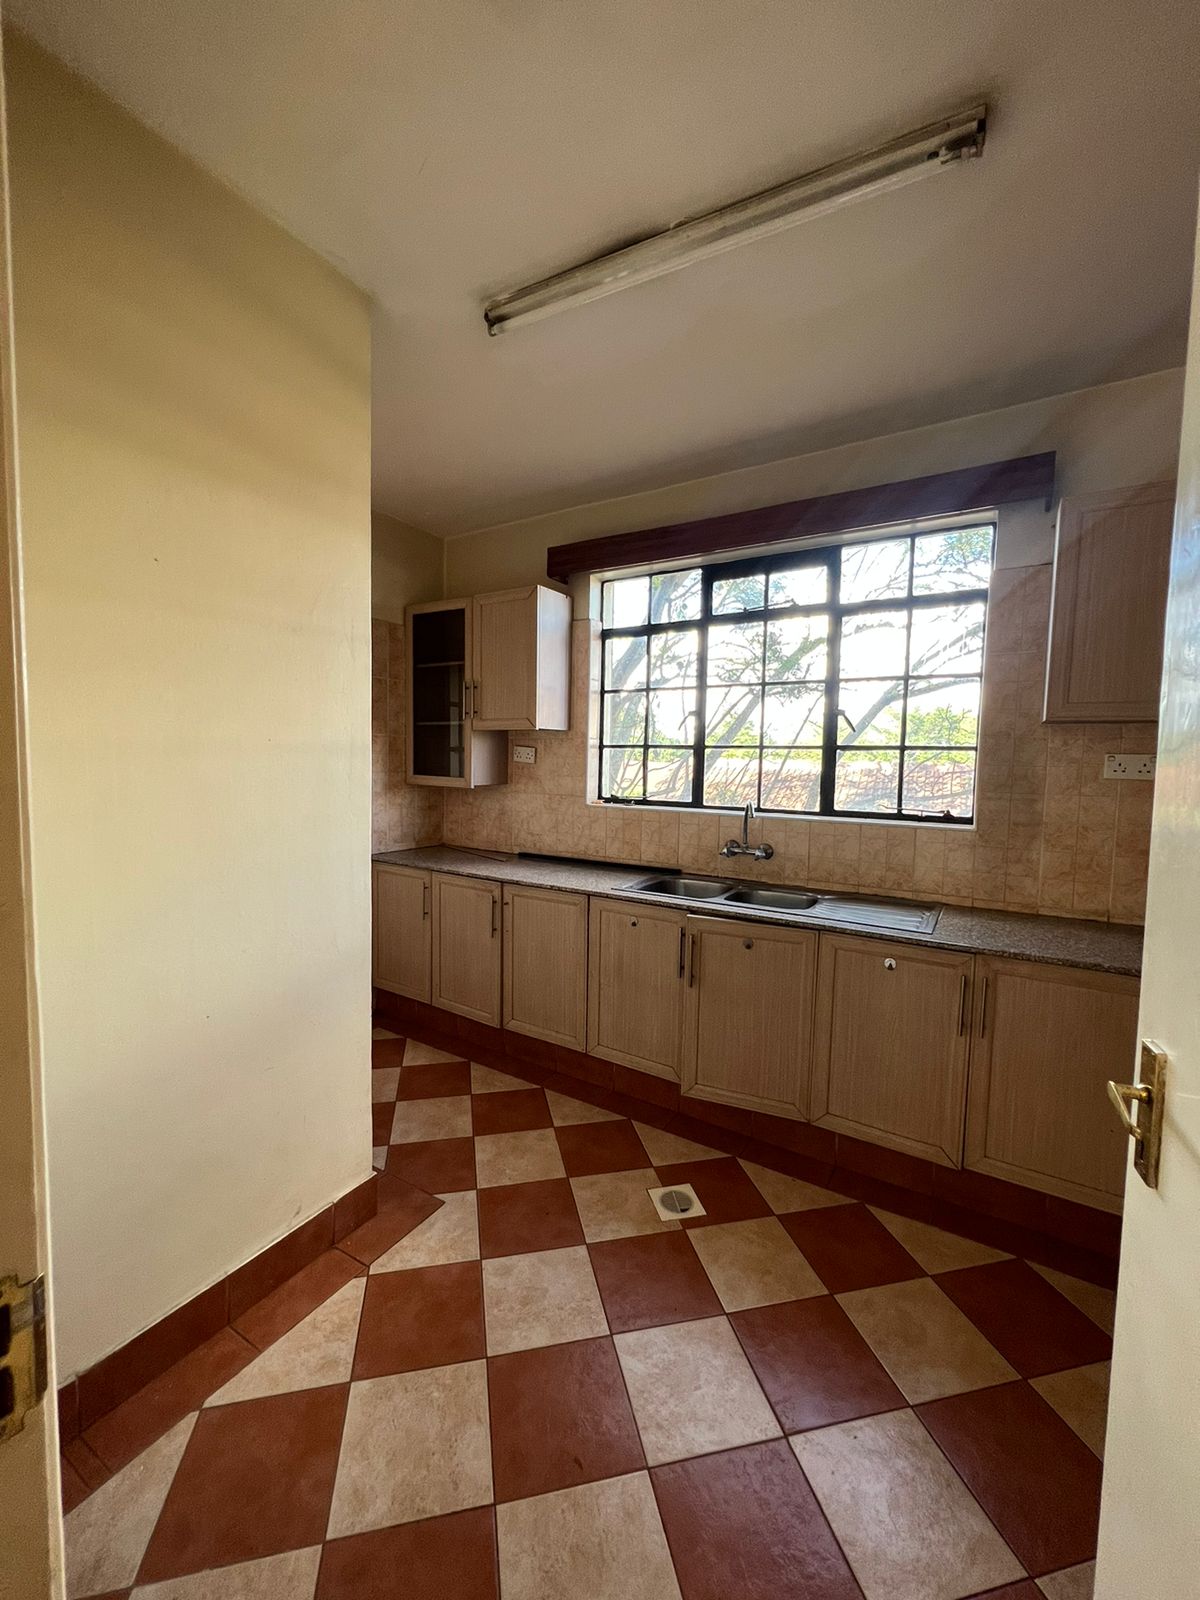 2 bedroom apartment to let in Kilimani, Nairobi. swimming pool, ample car parking. Rent per month 75,000. Musilli Homes